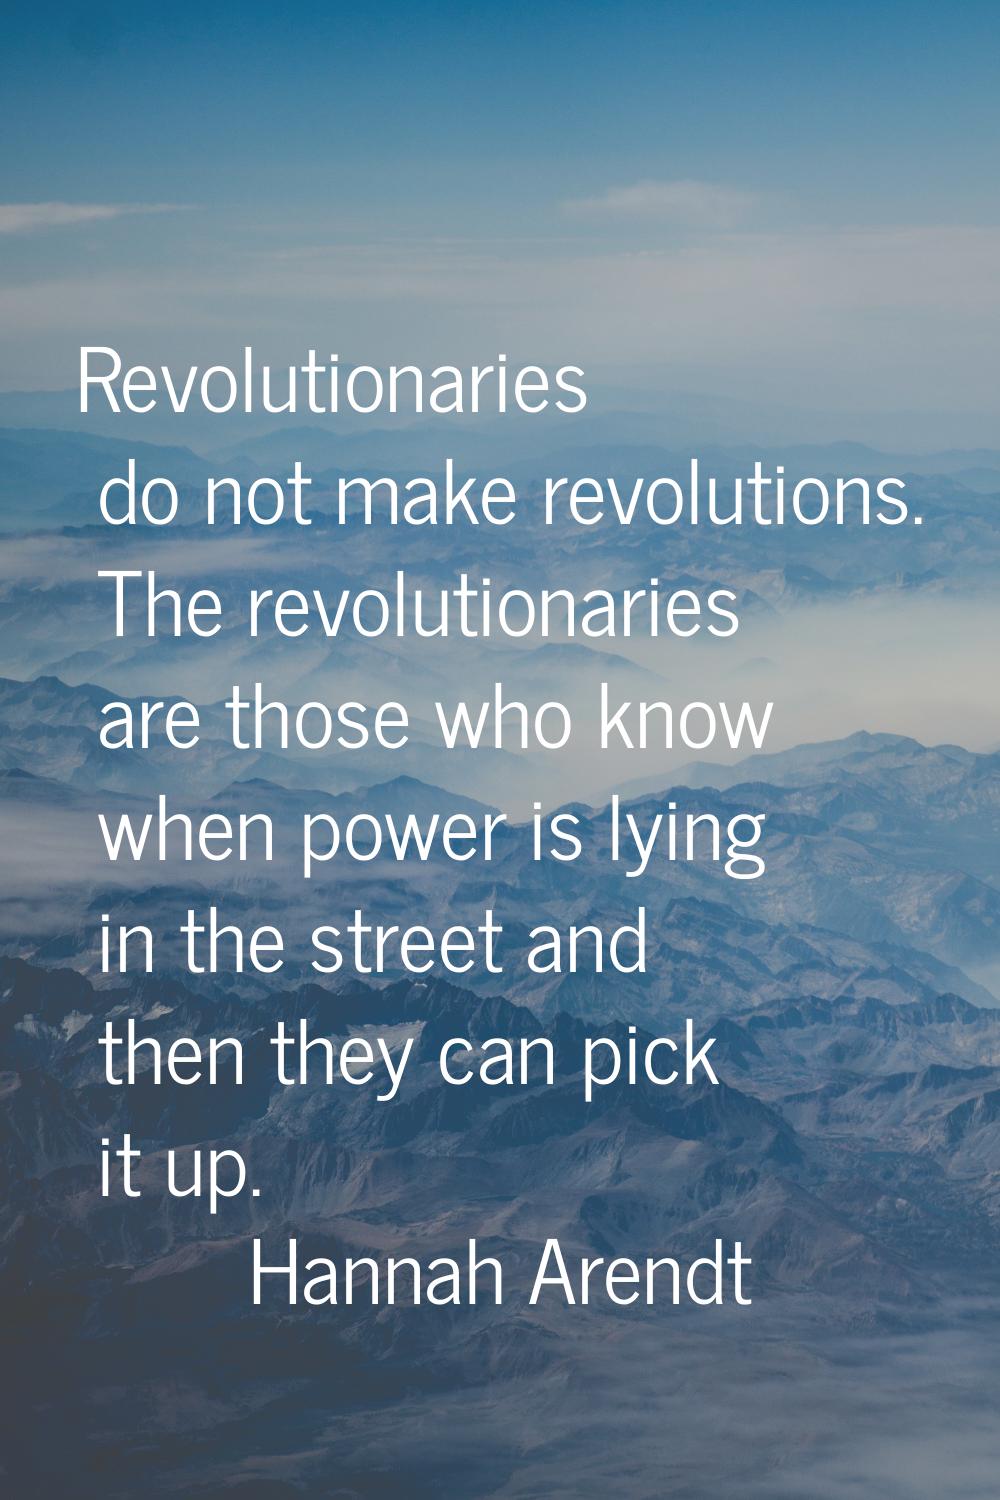 Revolutionaries do not make revolutions. The revolutionaries are those who know when power is lying